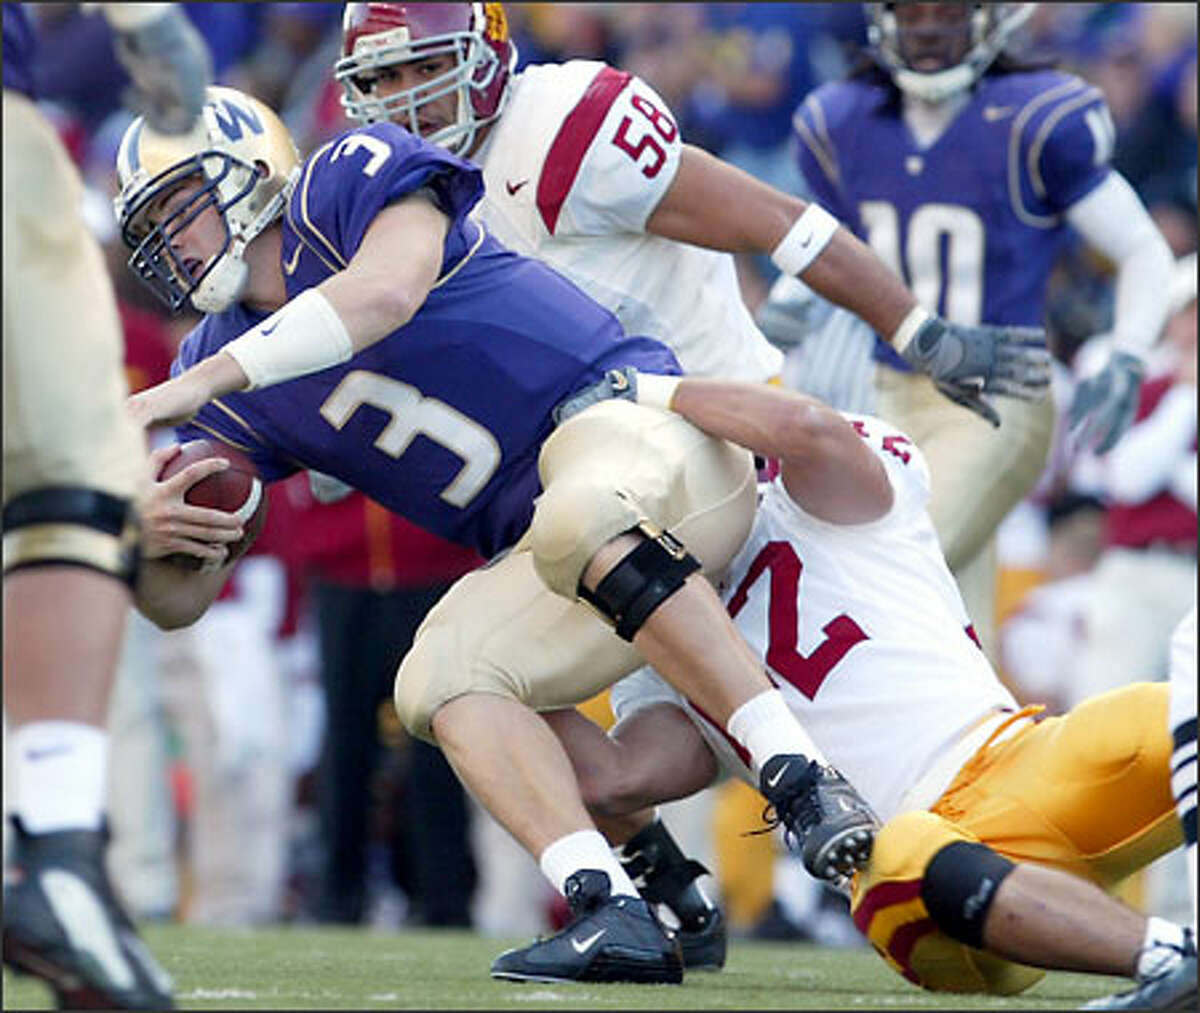 UW's Cody Pickett gets tackled in the first quarter.